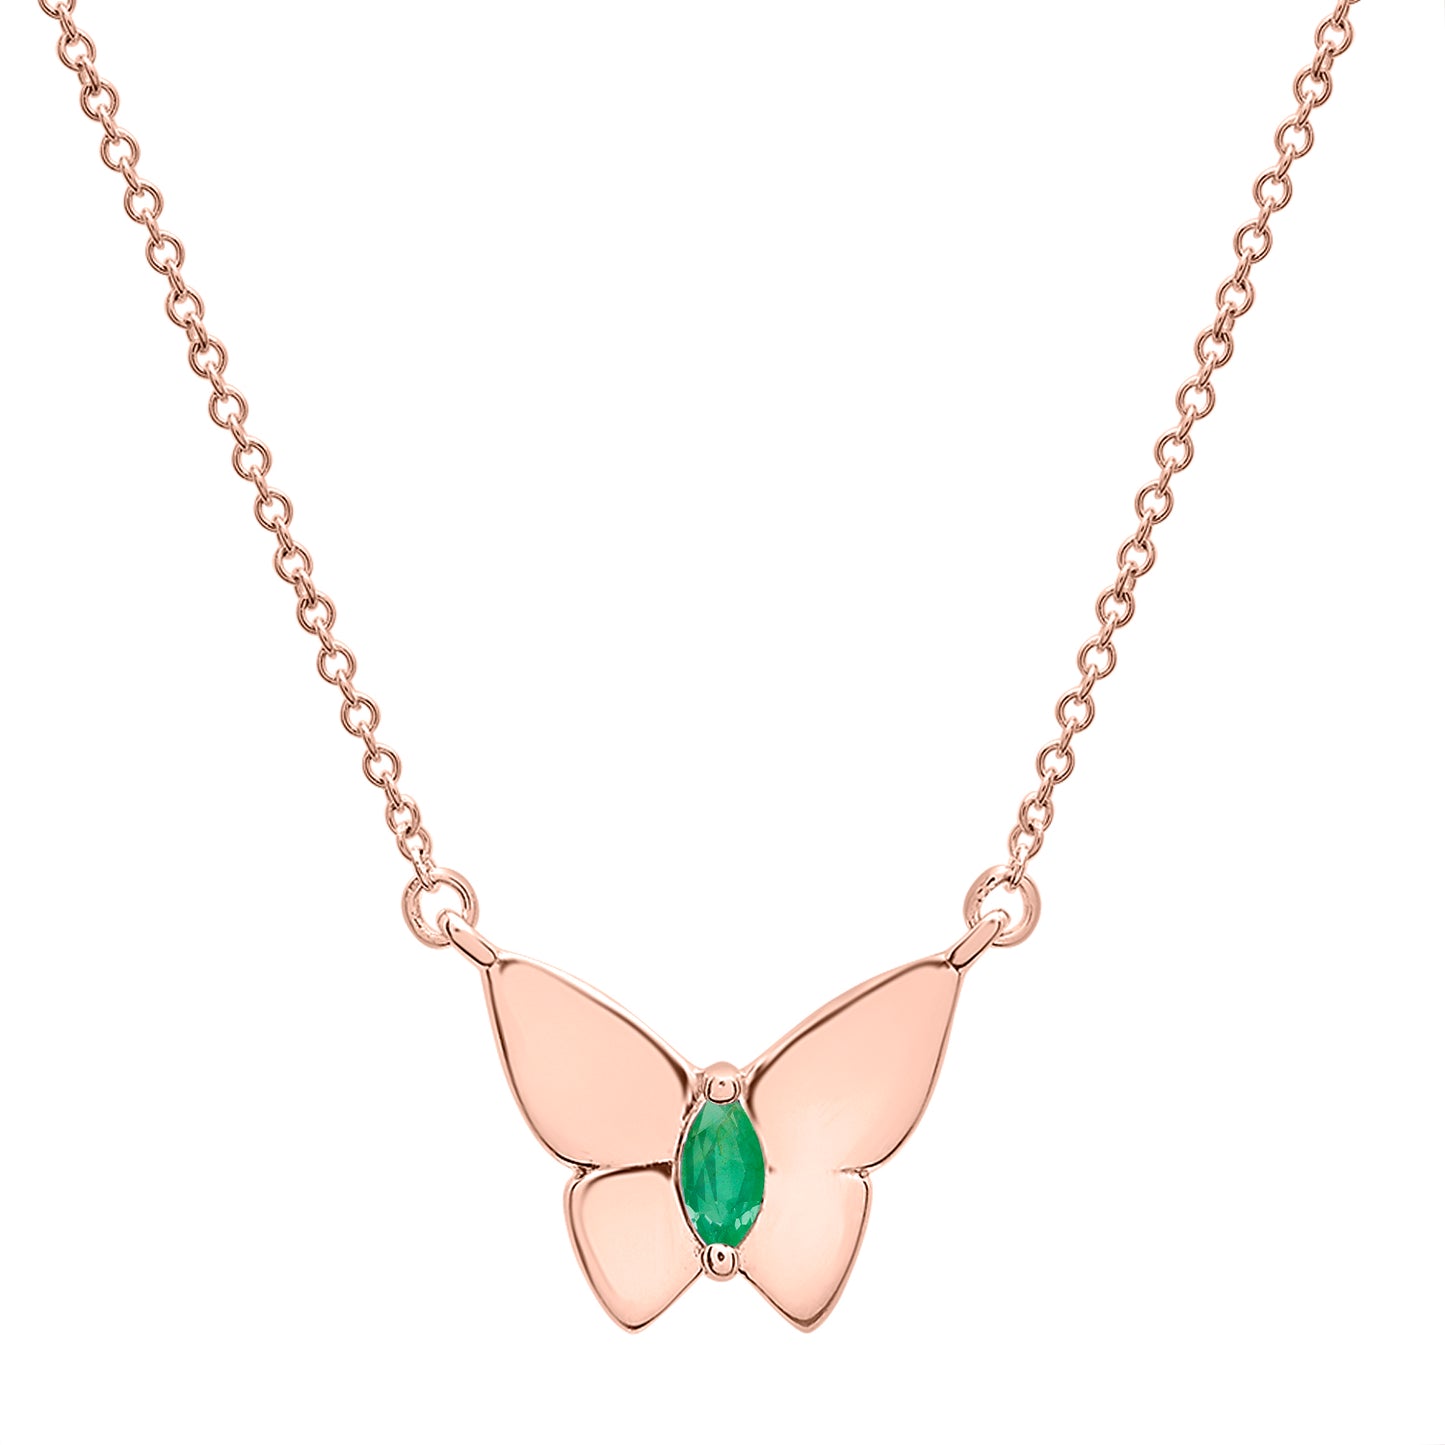 Butterfly Birthstone Necklace in Green with Gold chain